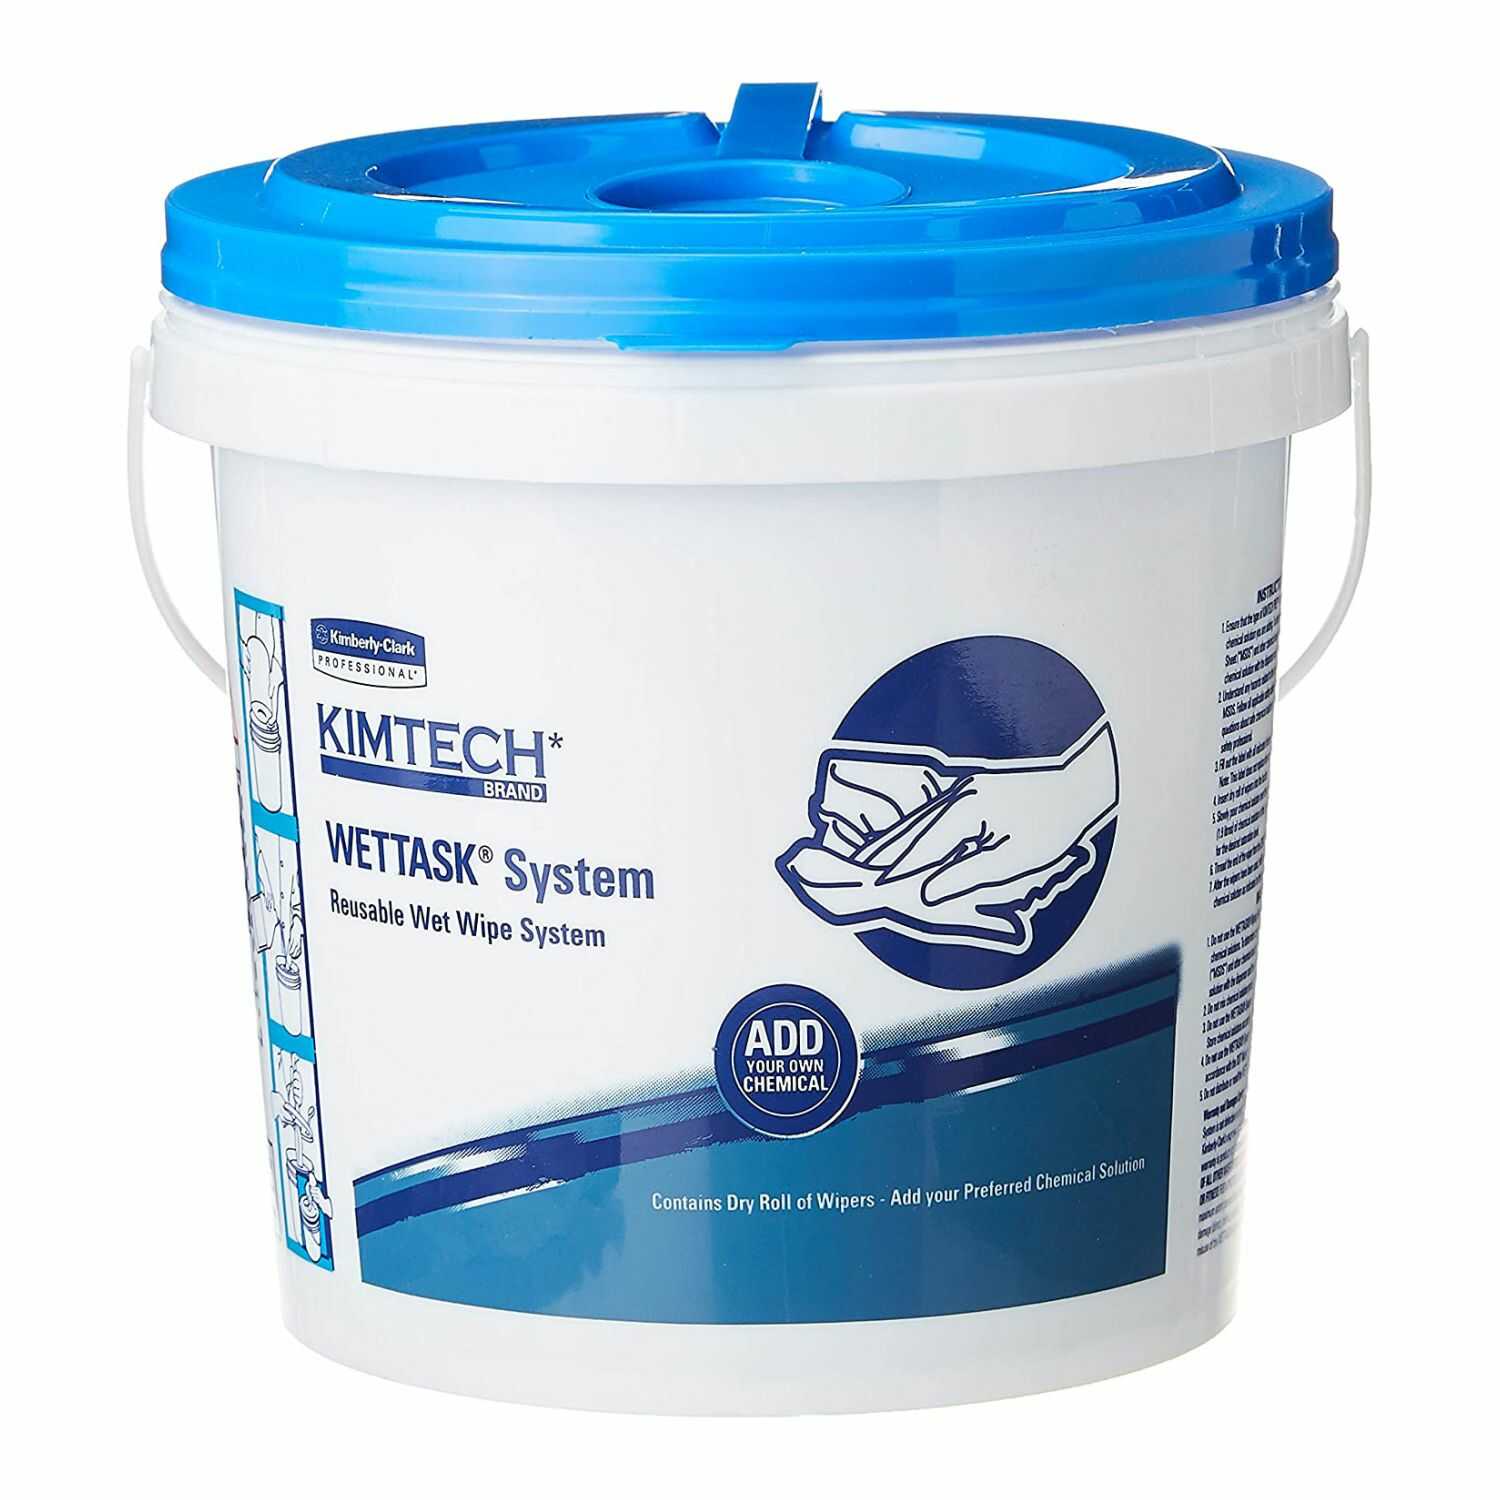 KIMTECH* WETTASK* Wipers for Solvents / 30.5 cm X 31.5 cm, 30902 ( Pack of 6 Rolls + 1 Bucket )